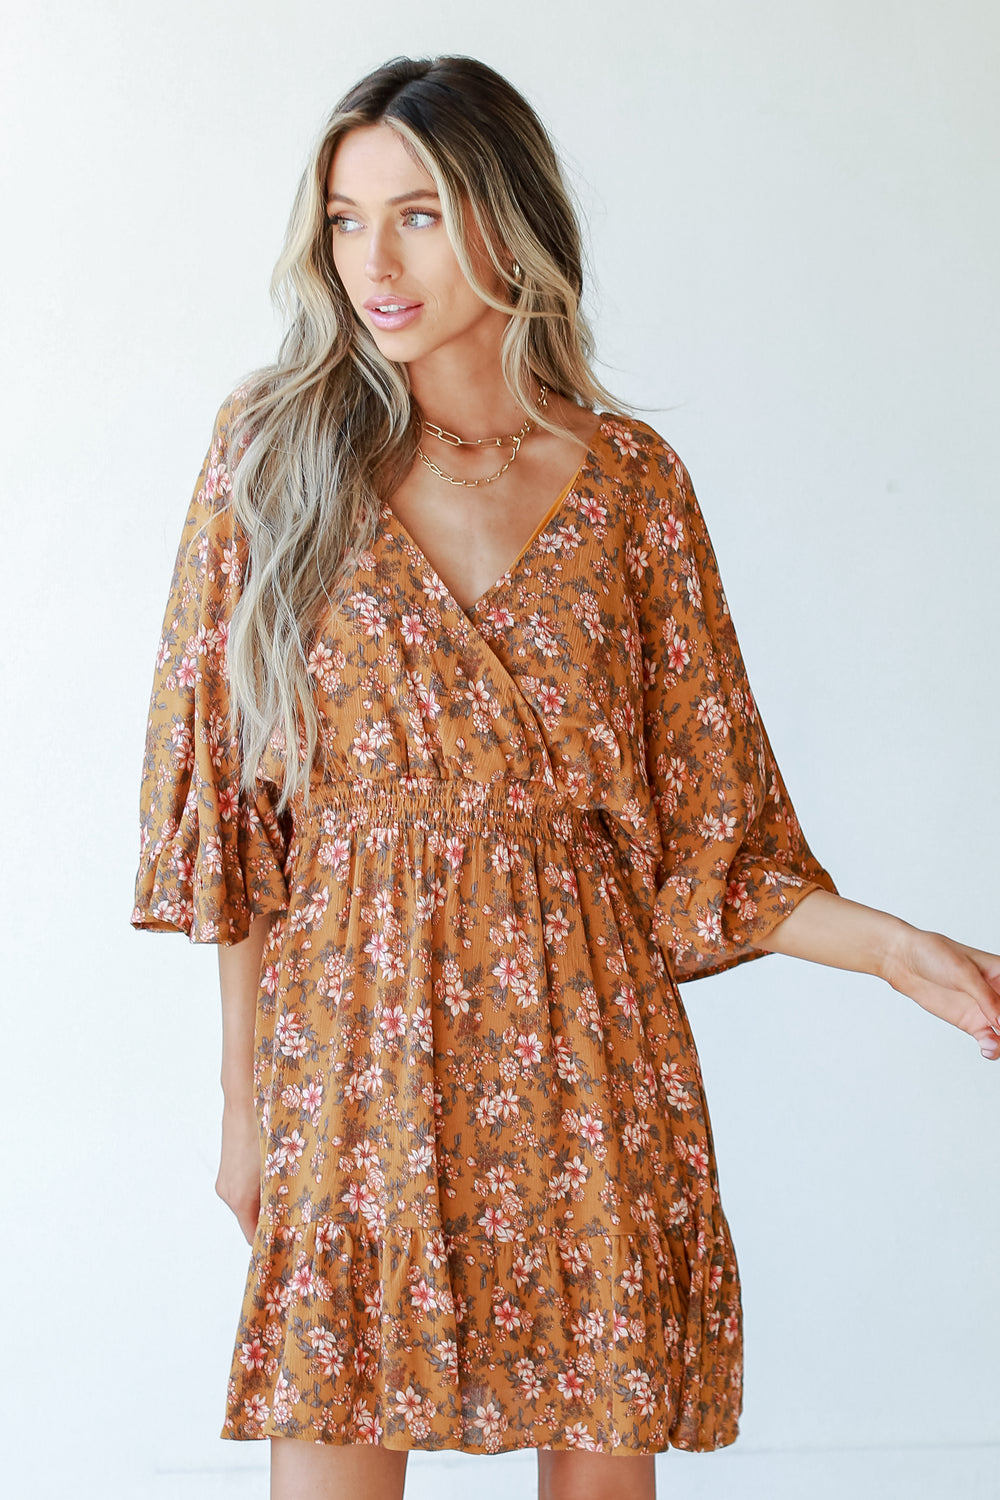 Floral Dress from dress up